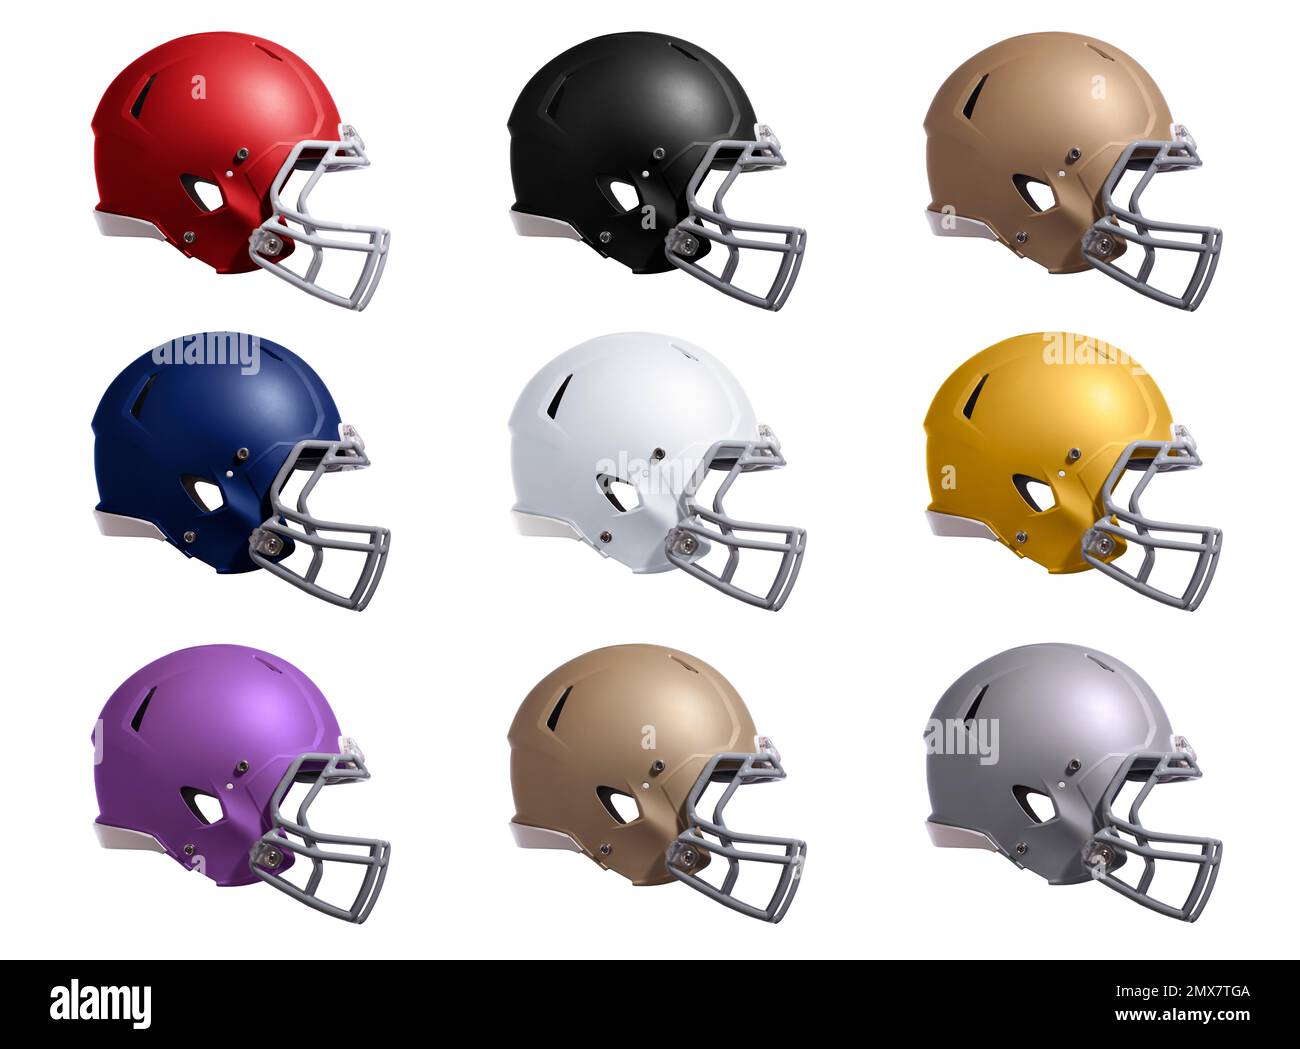 Pin by SupaaCam on Football  Football pictures, Football helmets, Football